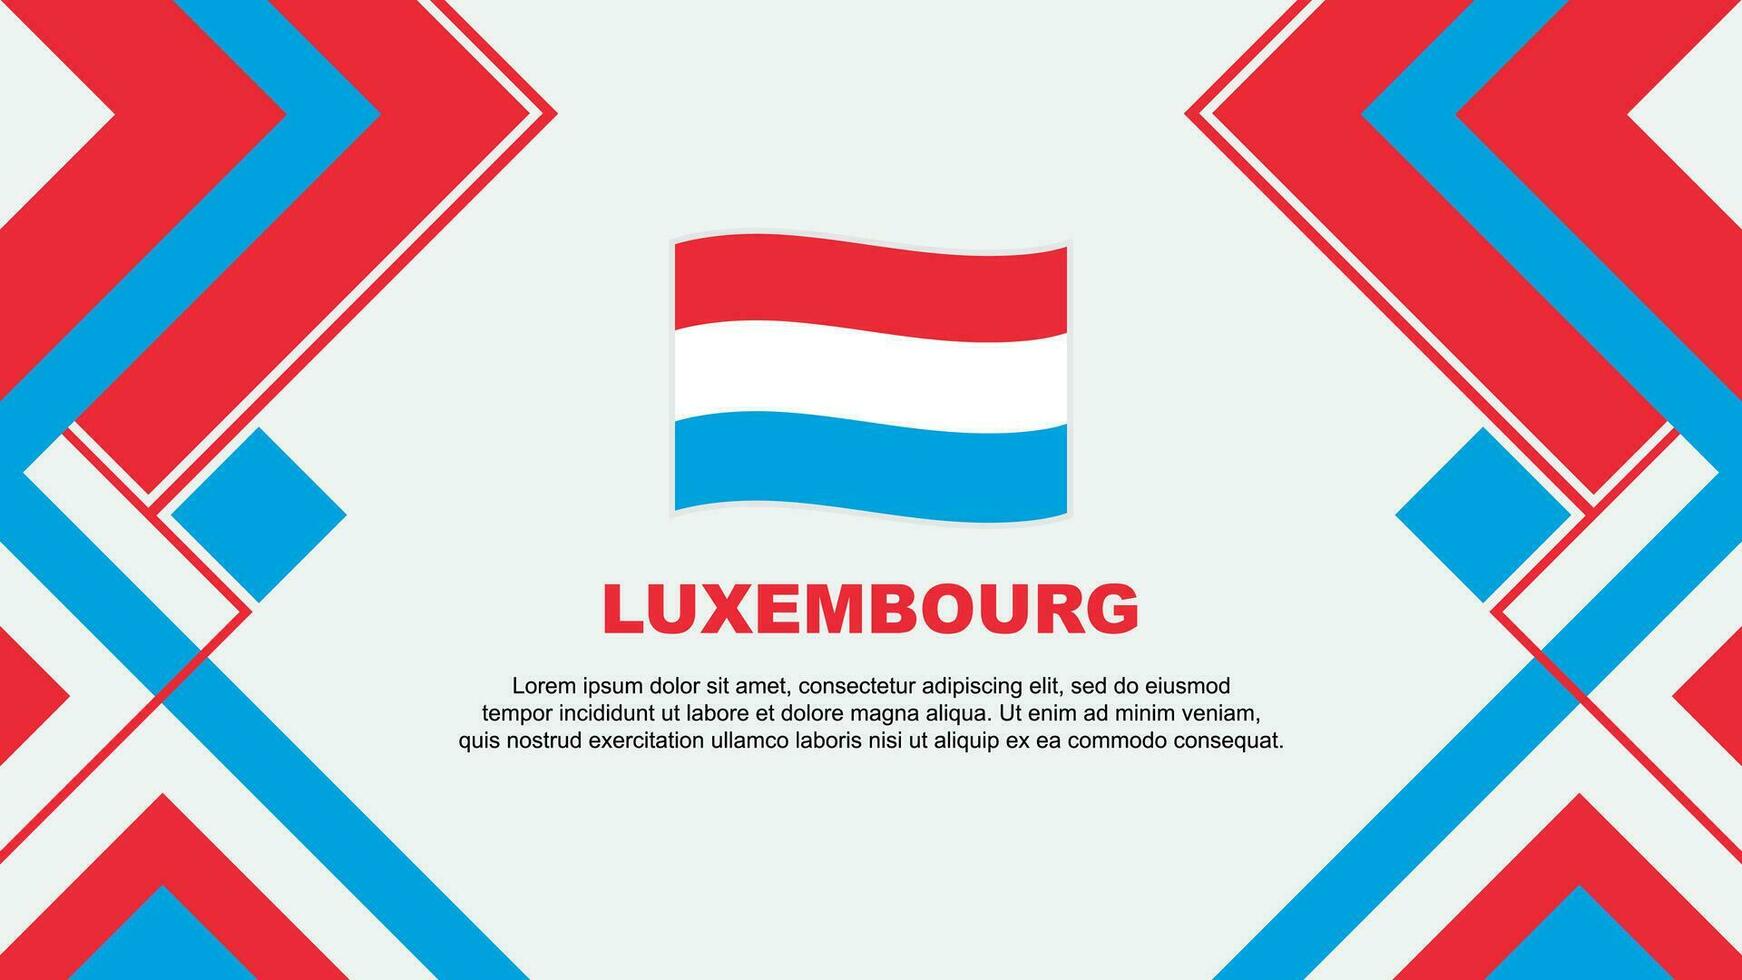 Luxembourg Flag Abstract Background Design Template. Luxembourg Independence Day Banner Wallpaper Vector Illustration. Luxembourg Banner